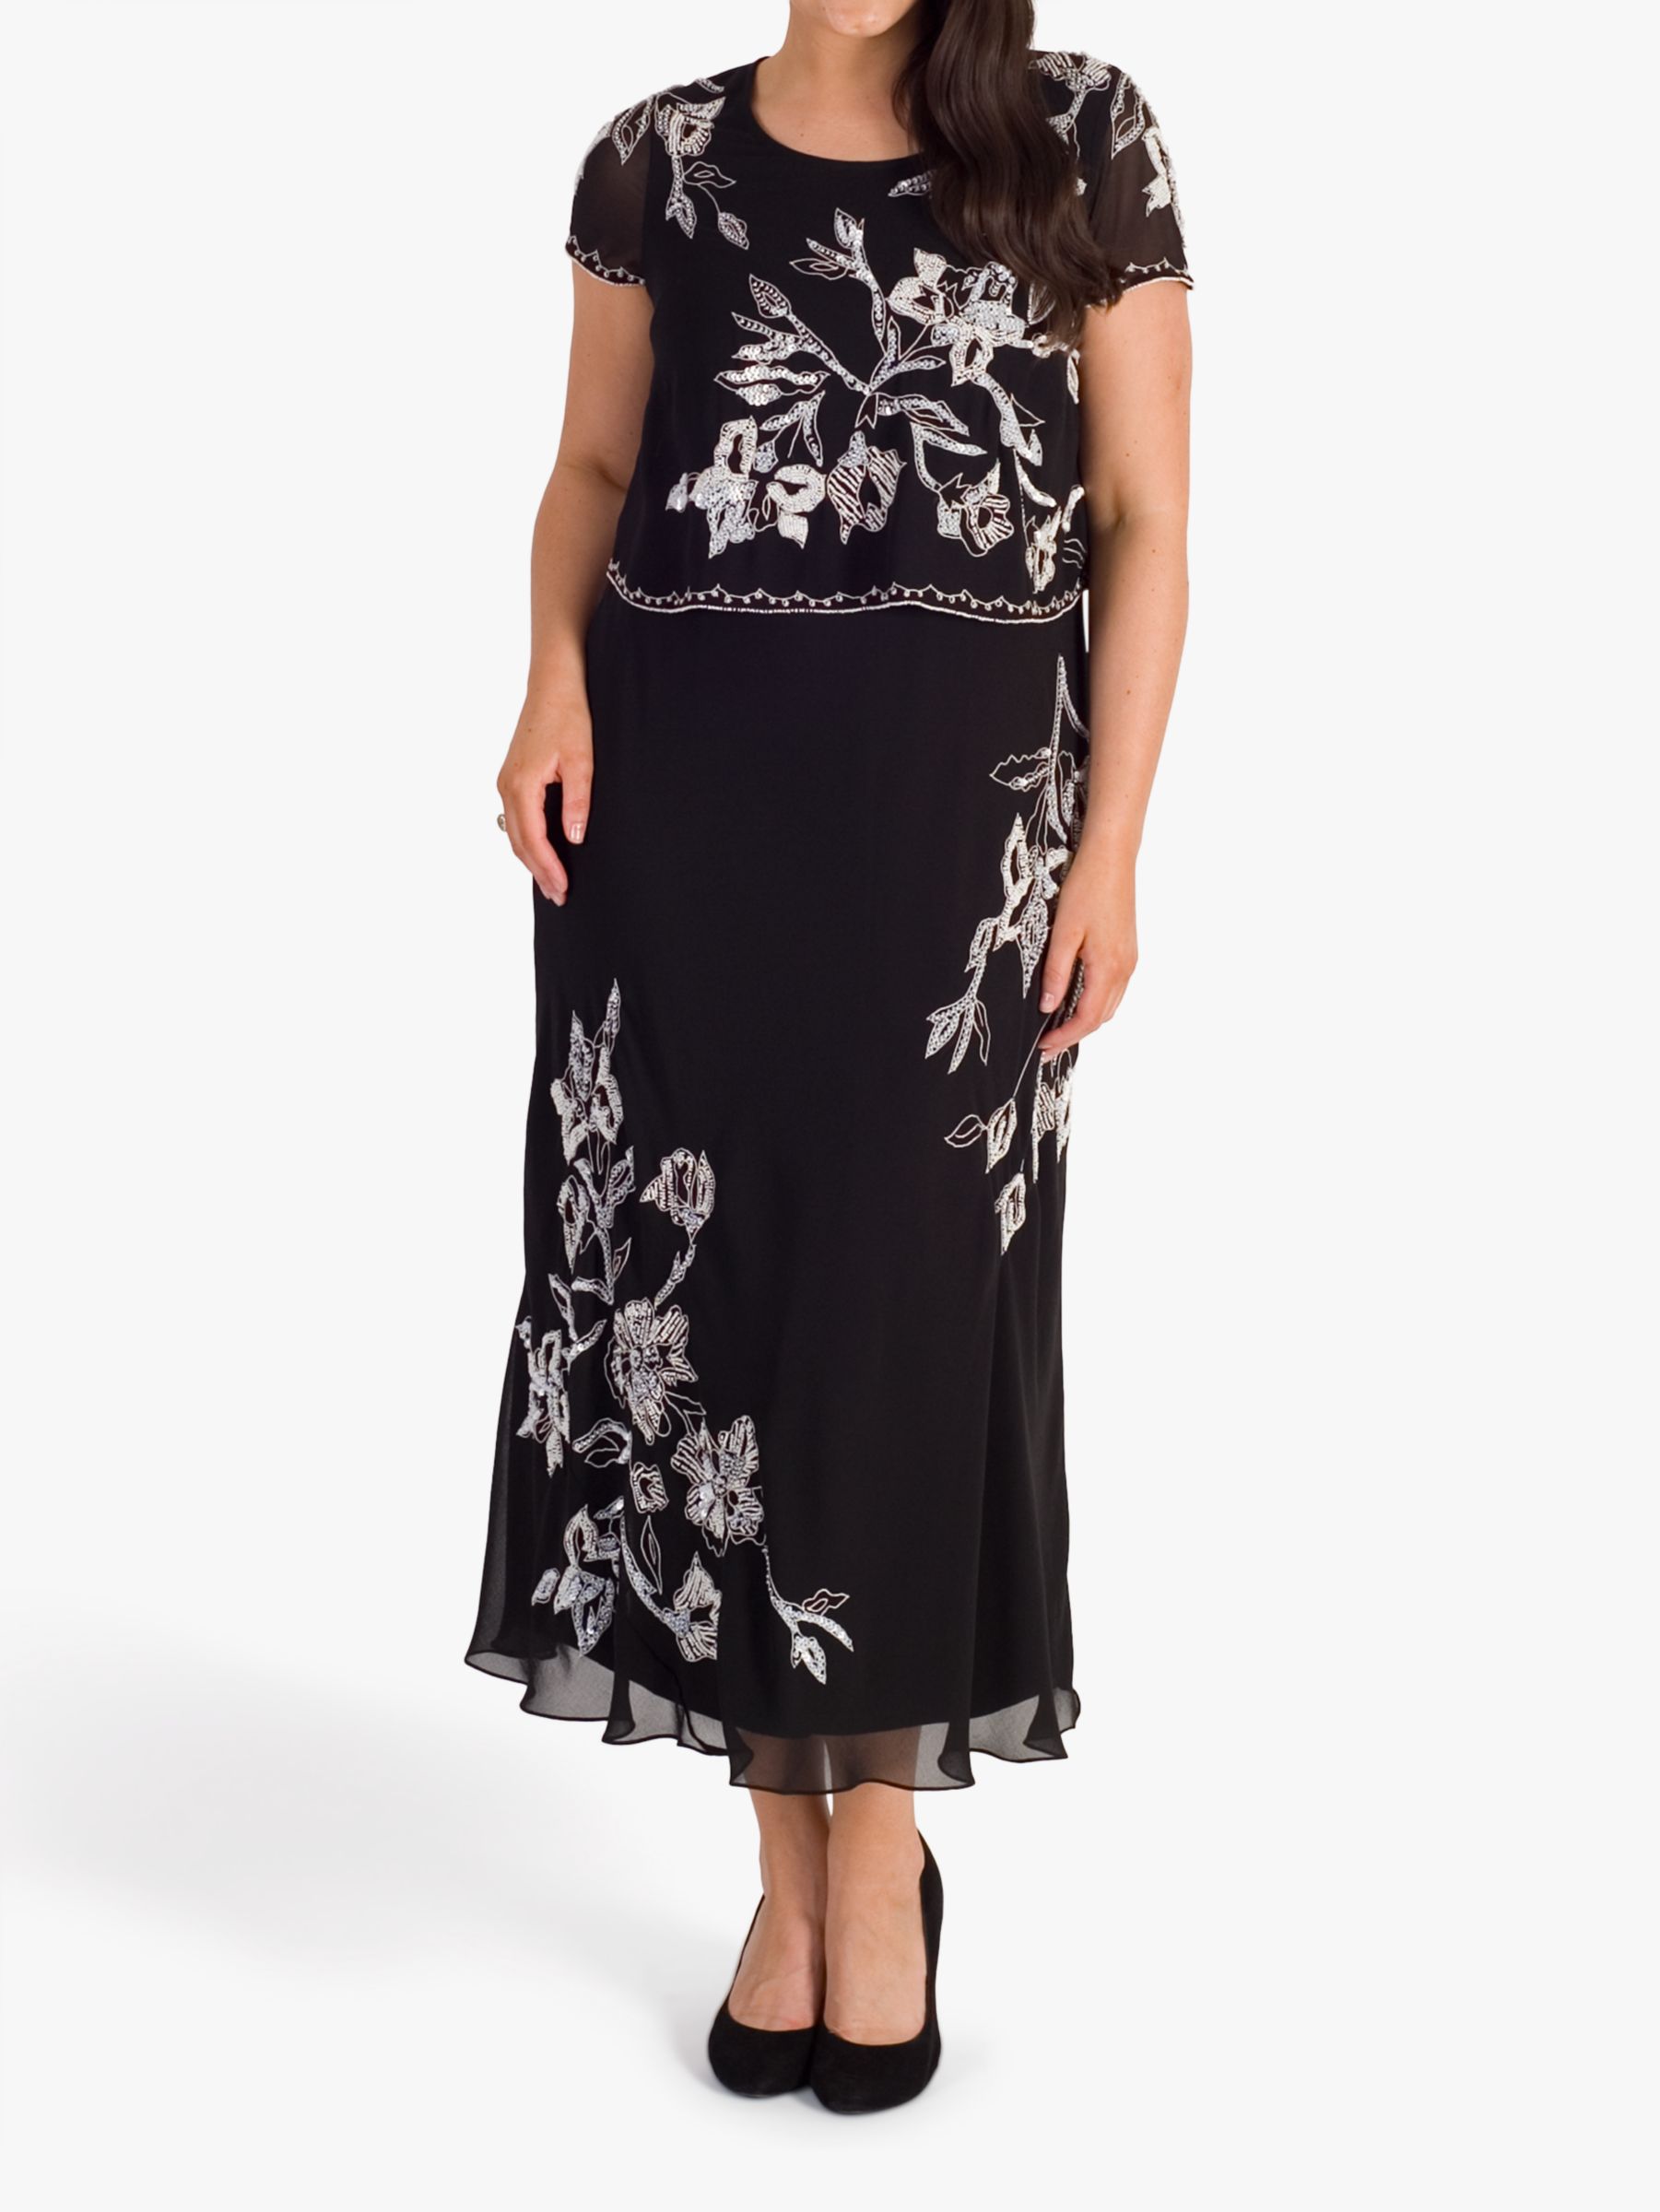 chesca Lily Bead Embroidered Layered Dress, at John Lewis & Partners